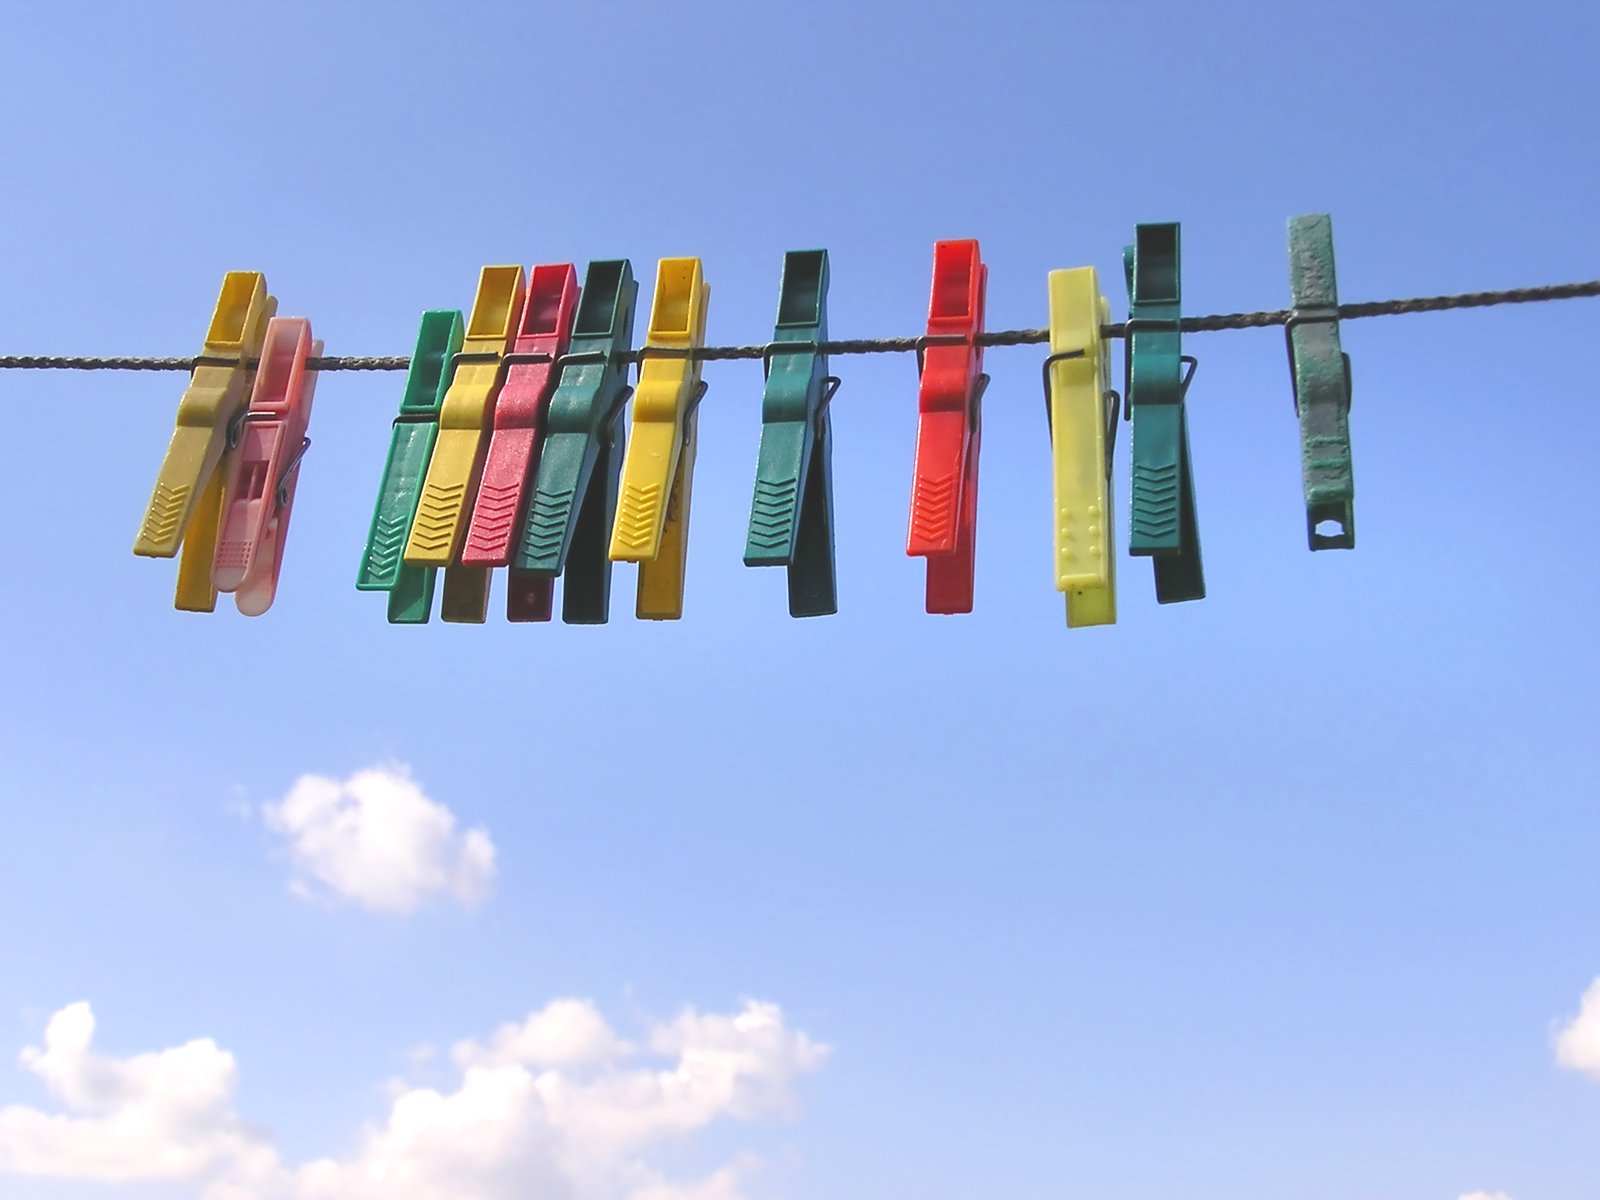 the clothesline is colorfully hung from a wire